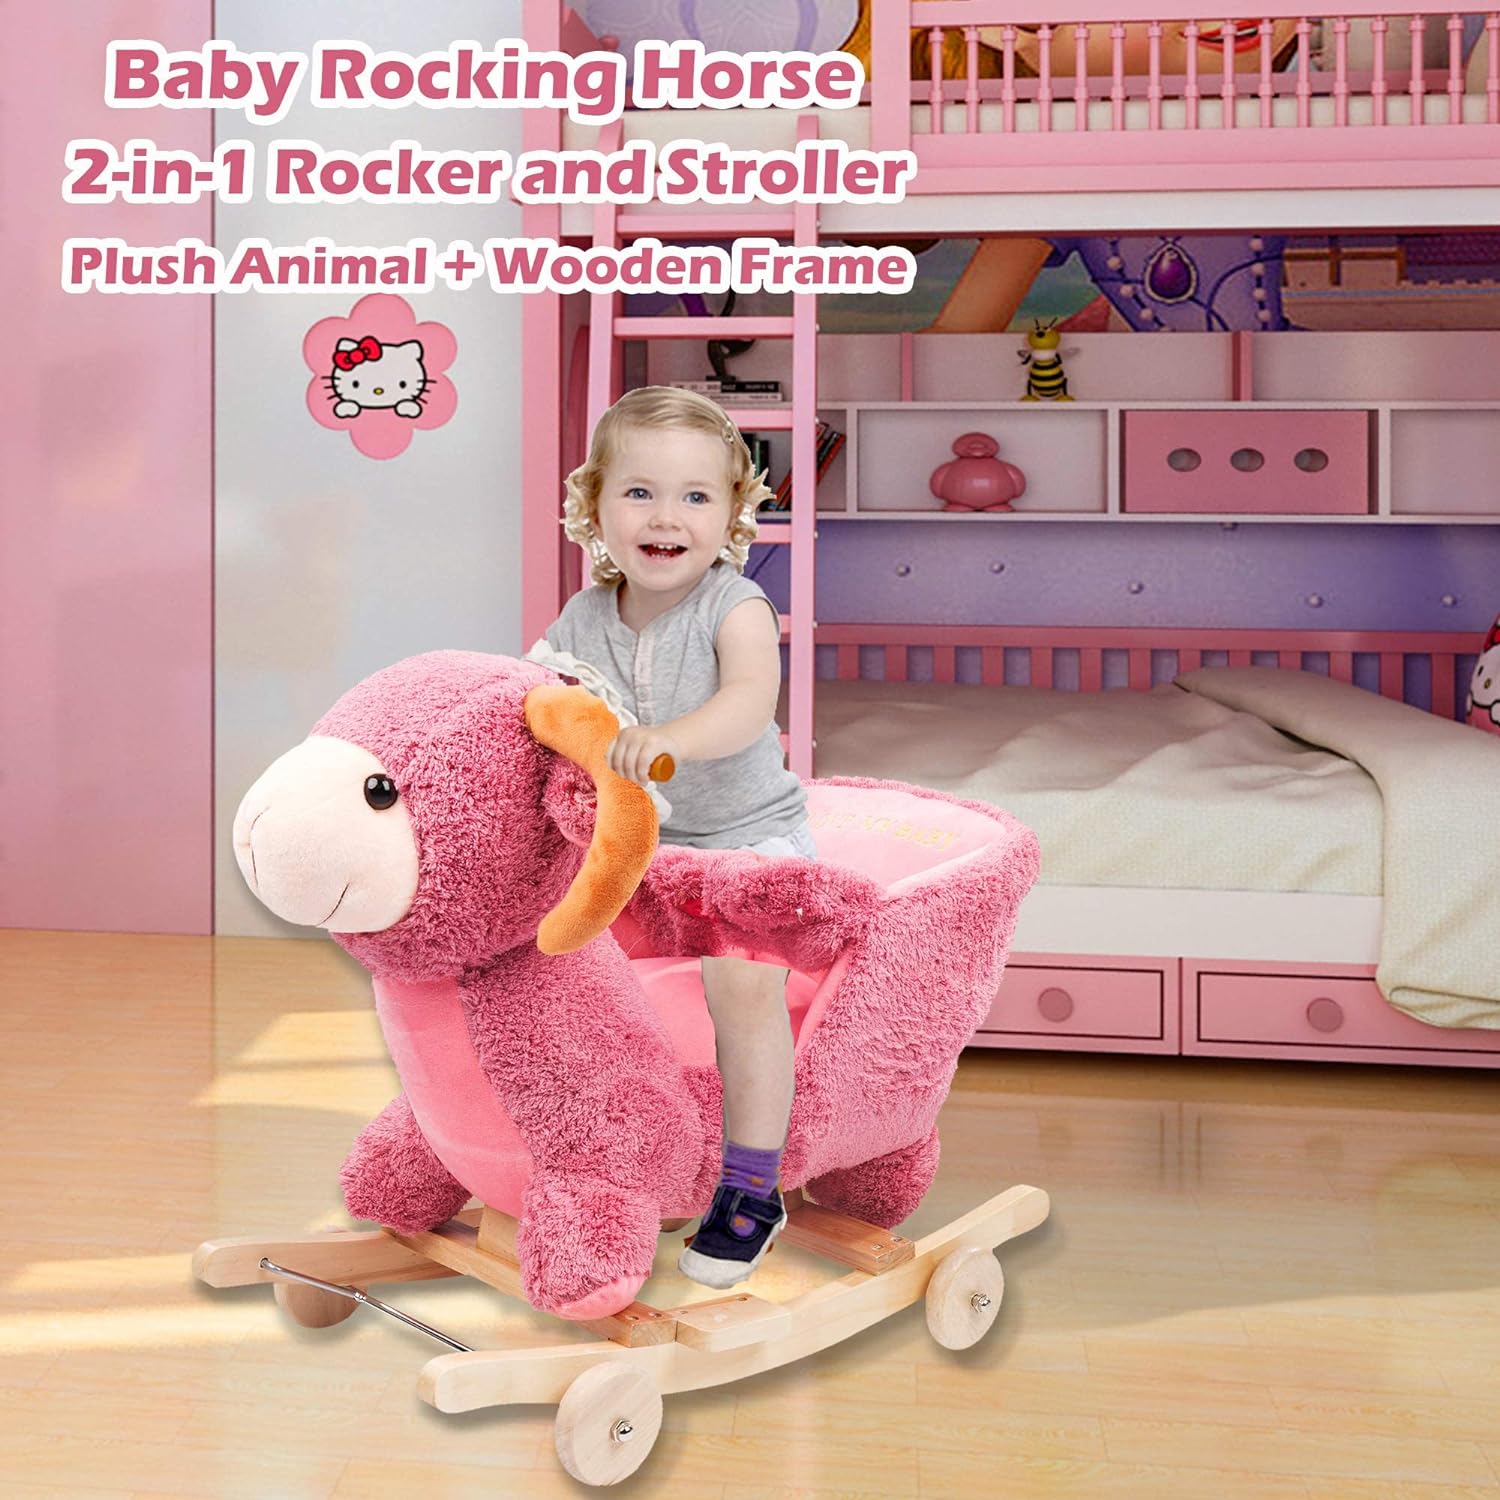 2-in-1 Ride-on Wooden Plush Rocking Horse Chair with Music for Baby Kids Toddlers, Pink Sheep